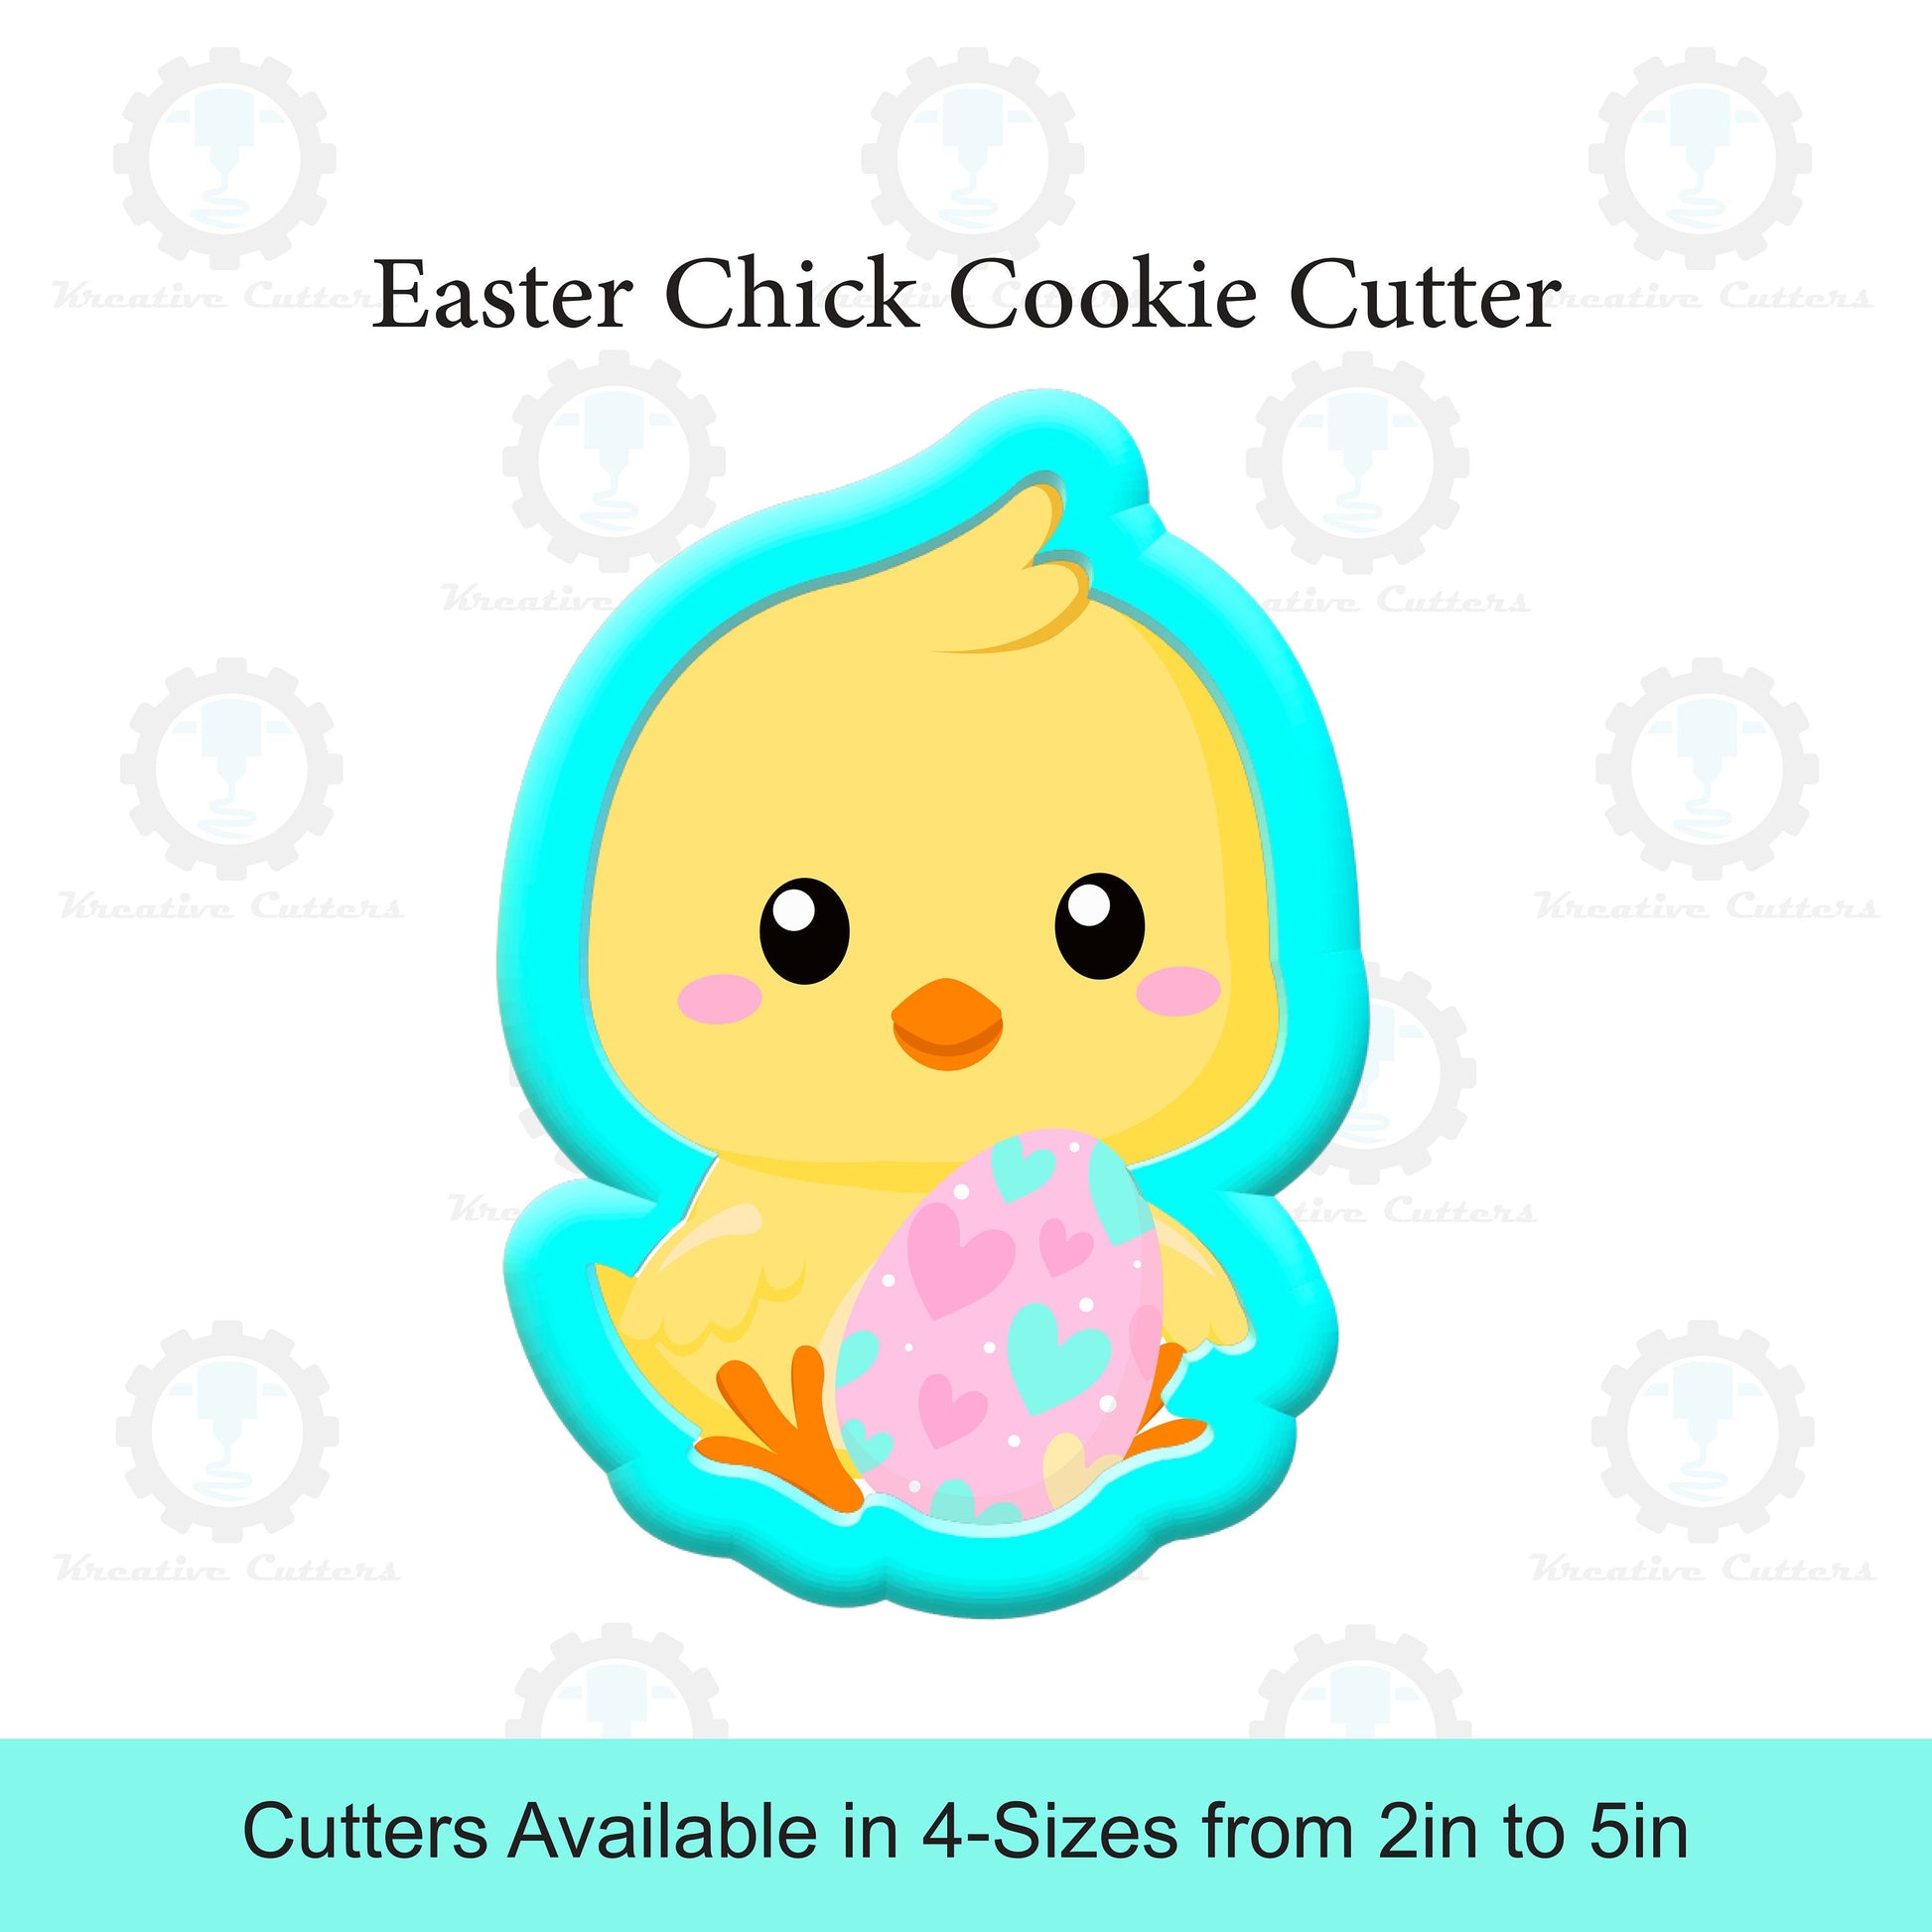 Easter Chick Cookie Cutters